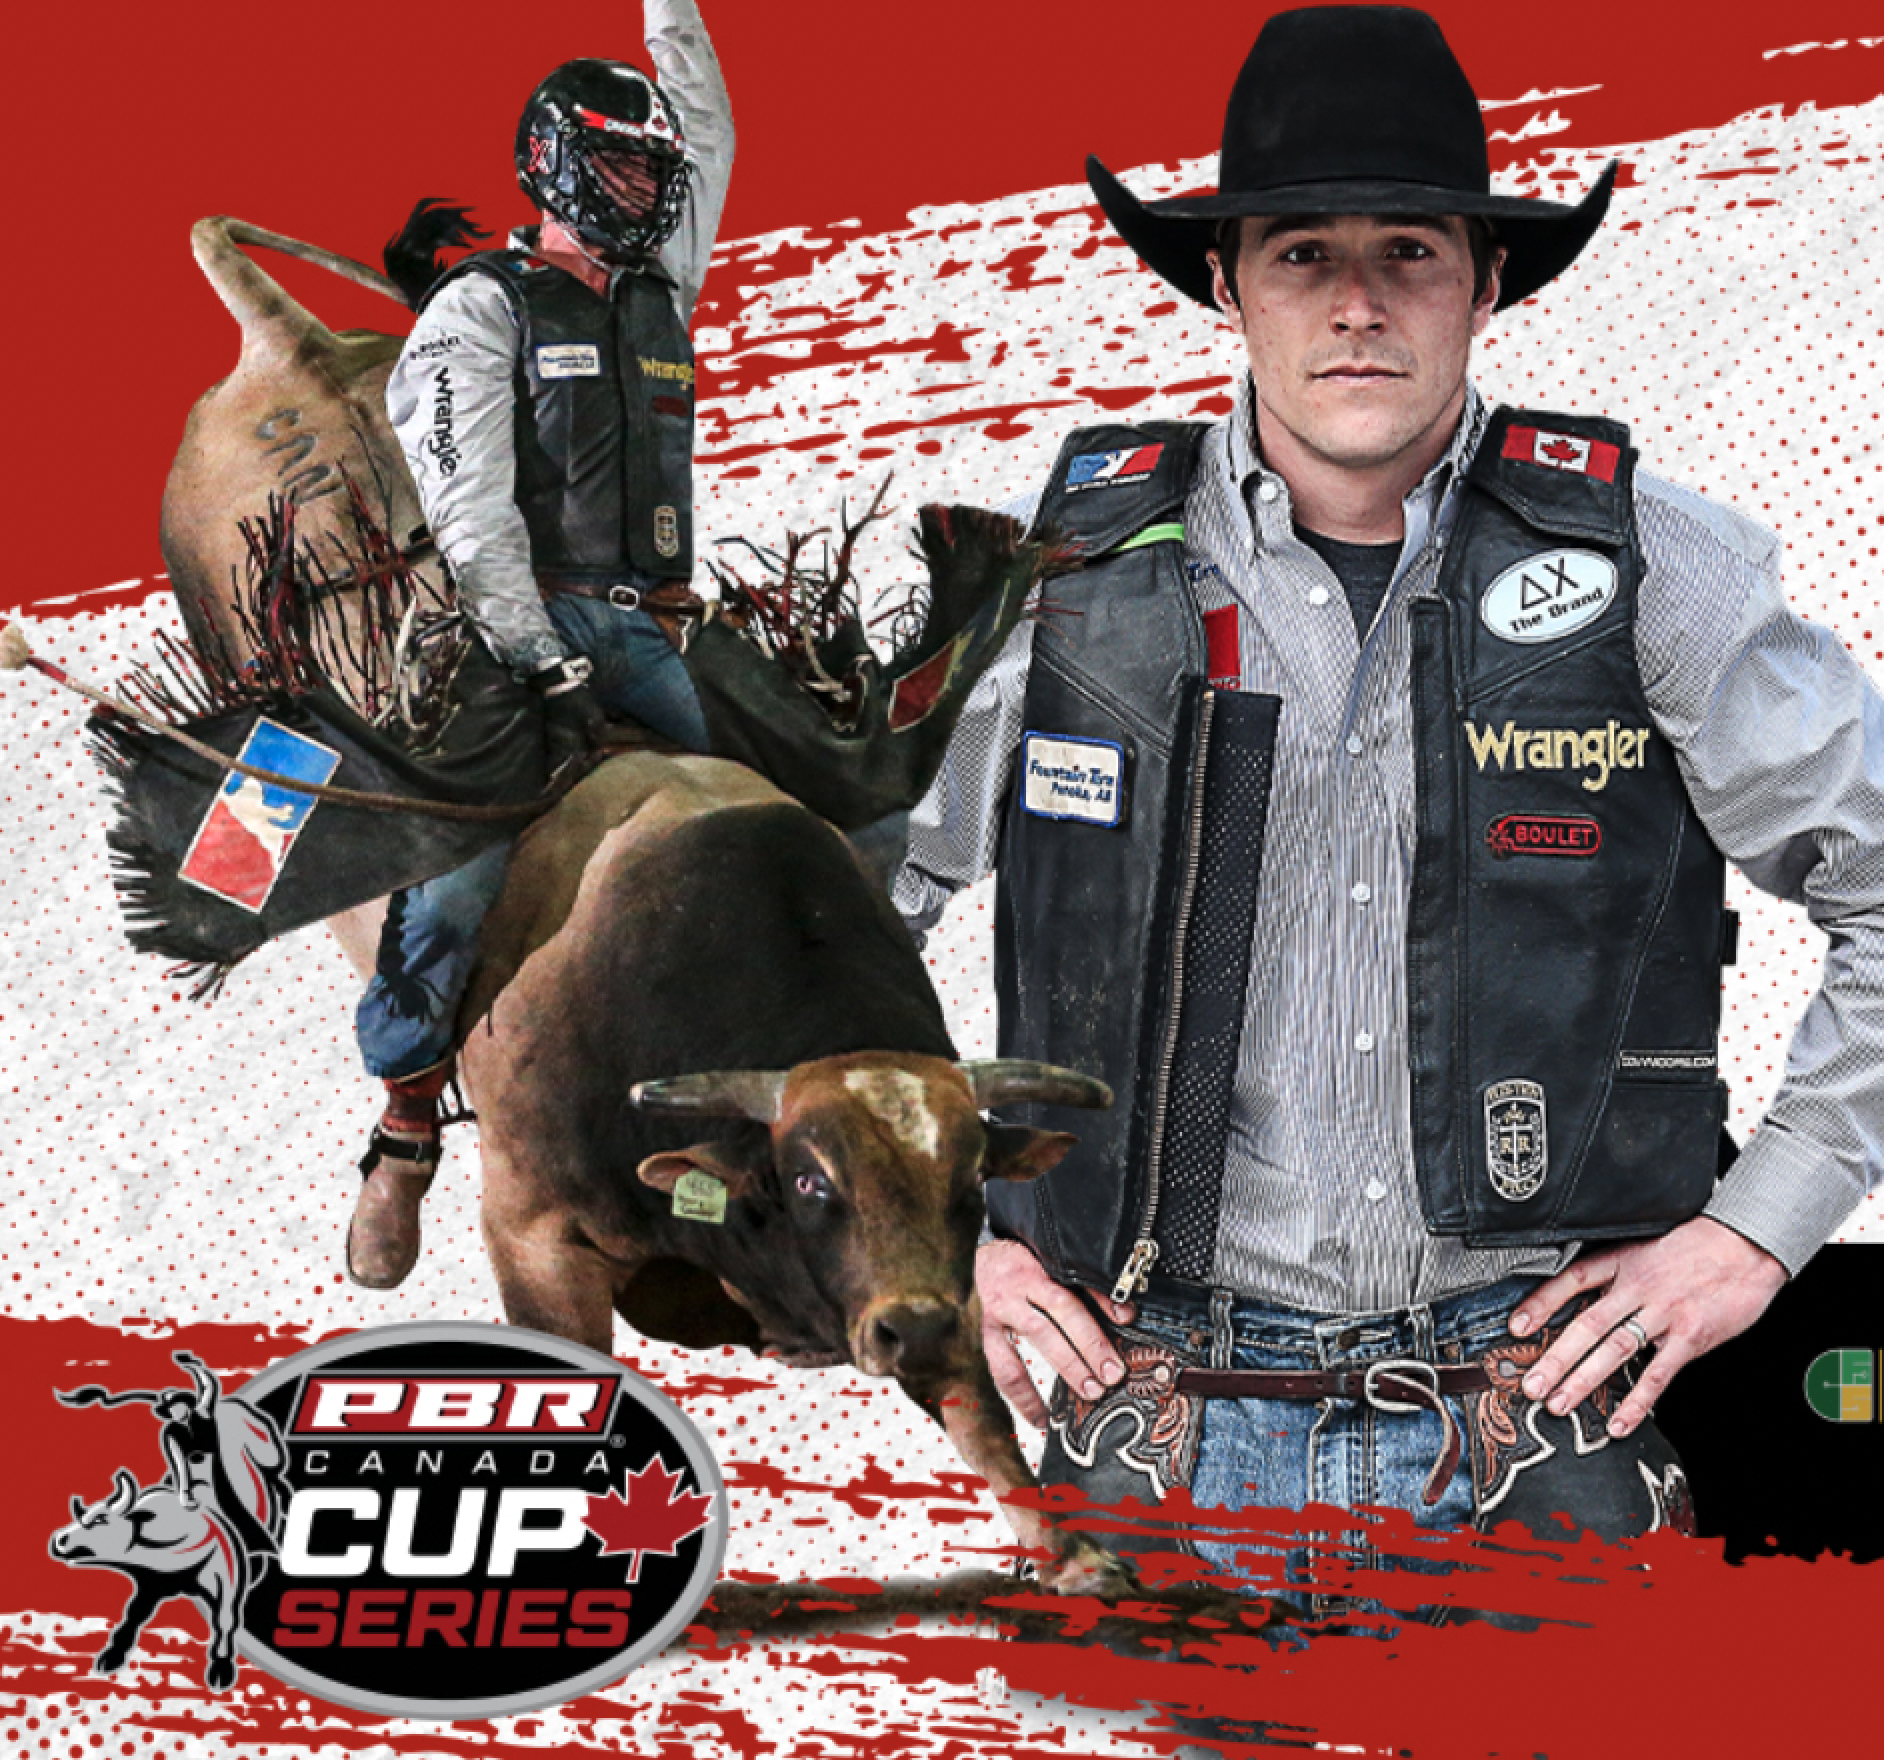 PBR Canada Cup Series promotional photo